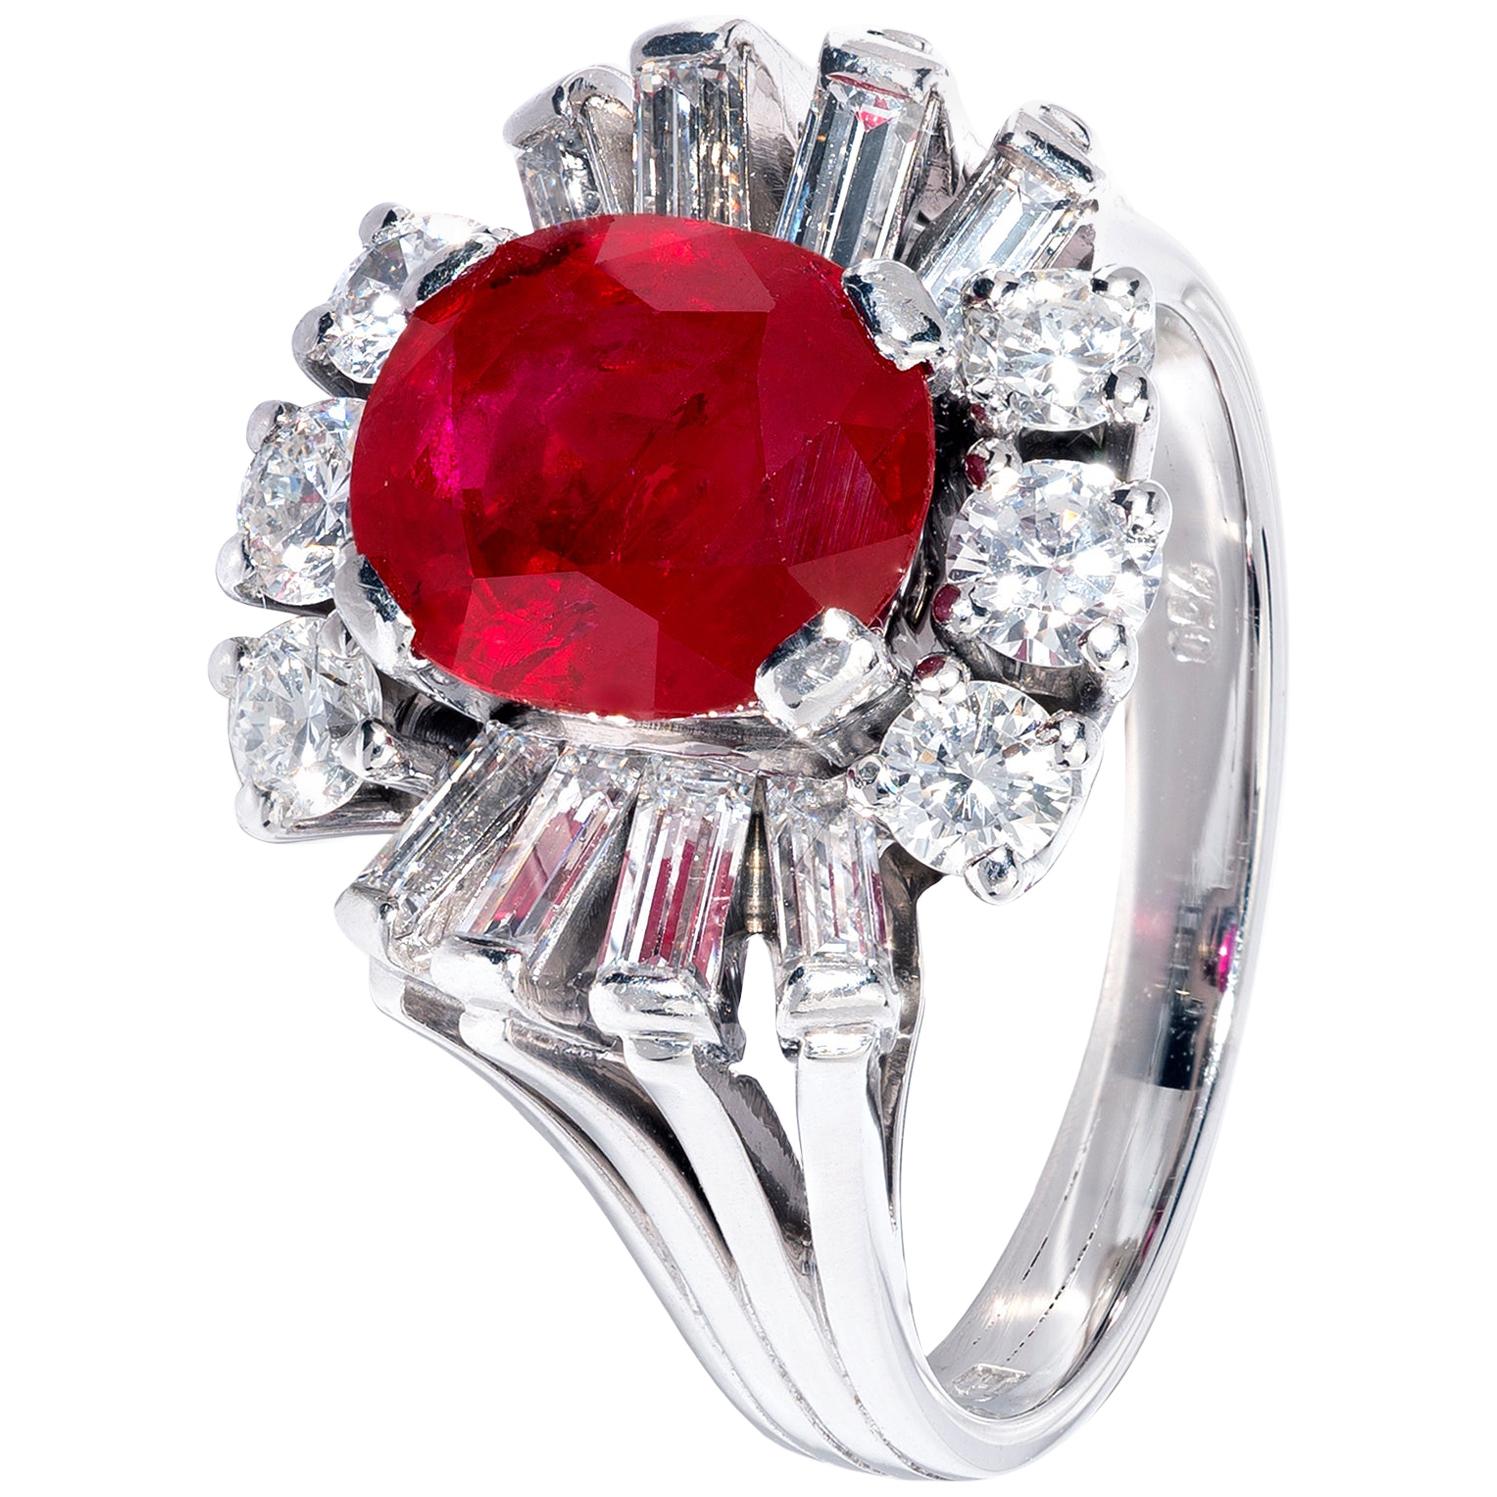 Unique Oval Red Ruby Ring in White Gold with White Diamond Surround